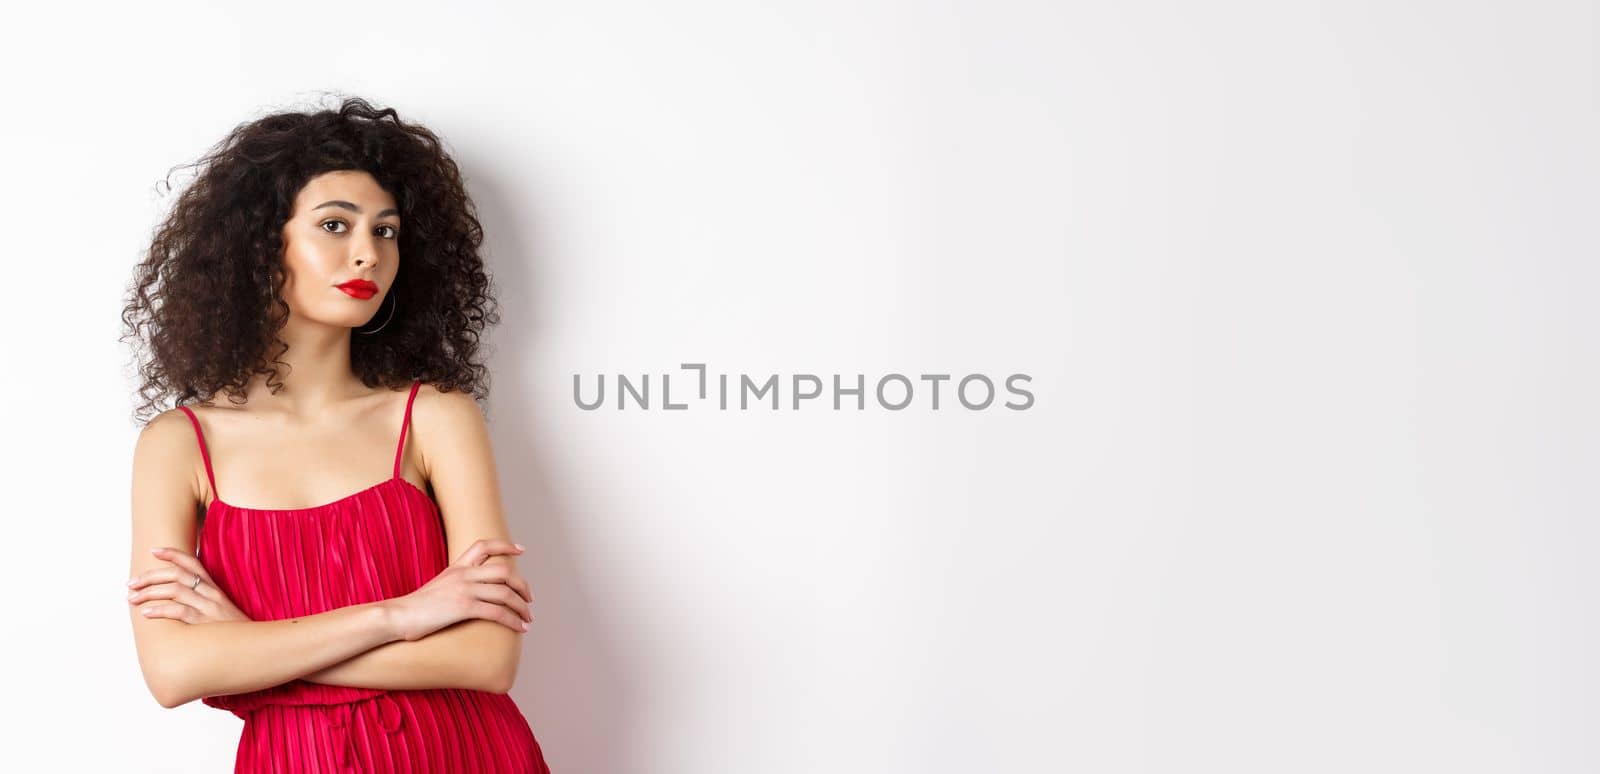 Sassy woman with curly hairstyle, wearing red dress and makeup, cross arms on chest, standing over white background by Benzoix